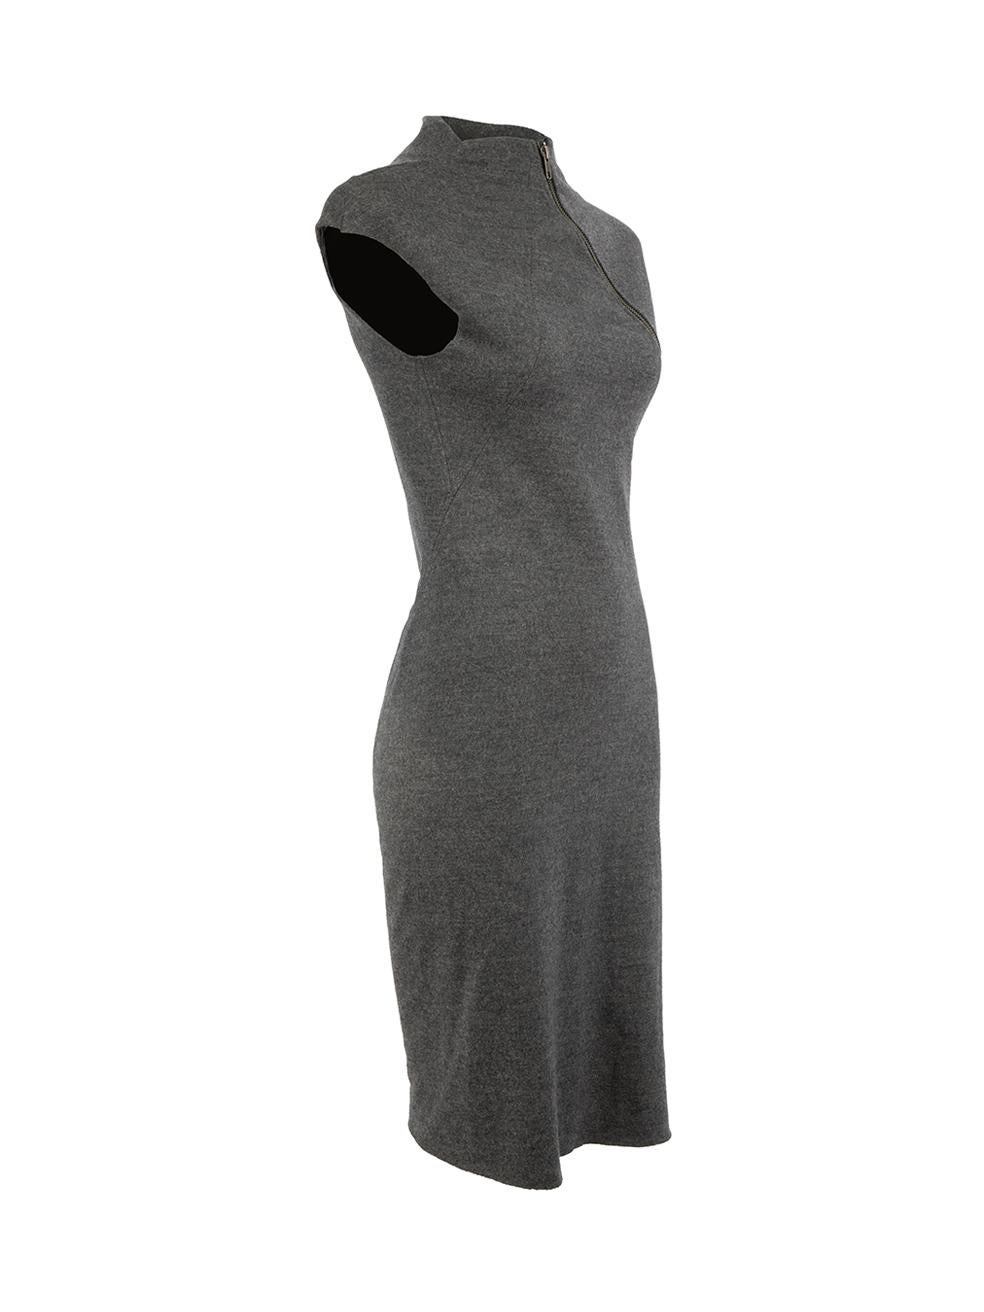 CONDITION is Very good. Hardly any visible wear to dress is evident on this used Helmut Lang designer resale item.
 
Details
Grey
Wool
Bodycon dress
Sleeveless
Mock neck
Curved back to front zip detail
Double ended zip fastening
Knee length

Made in